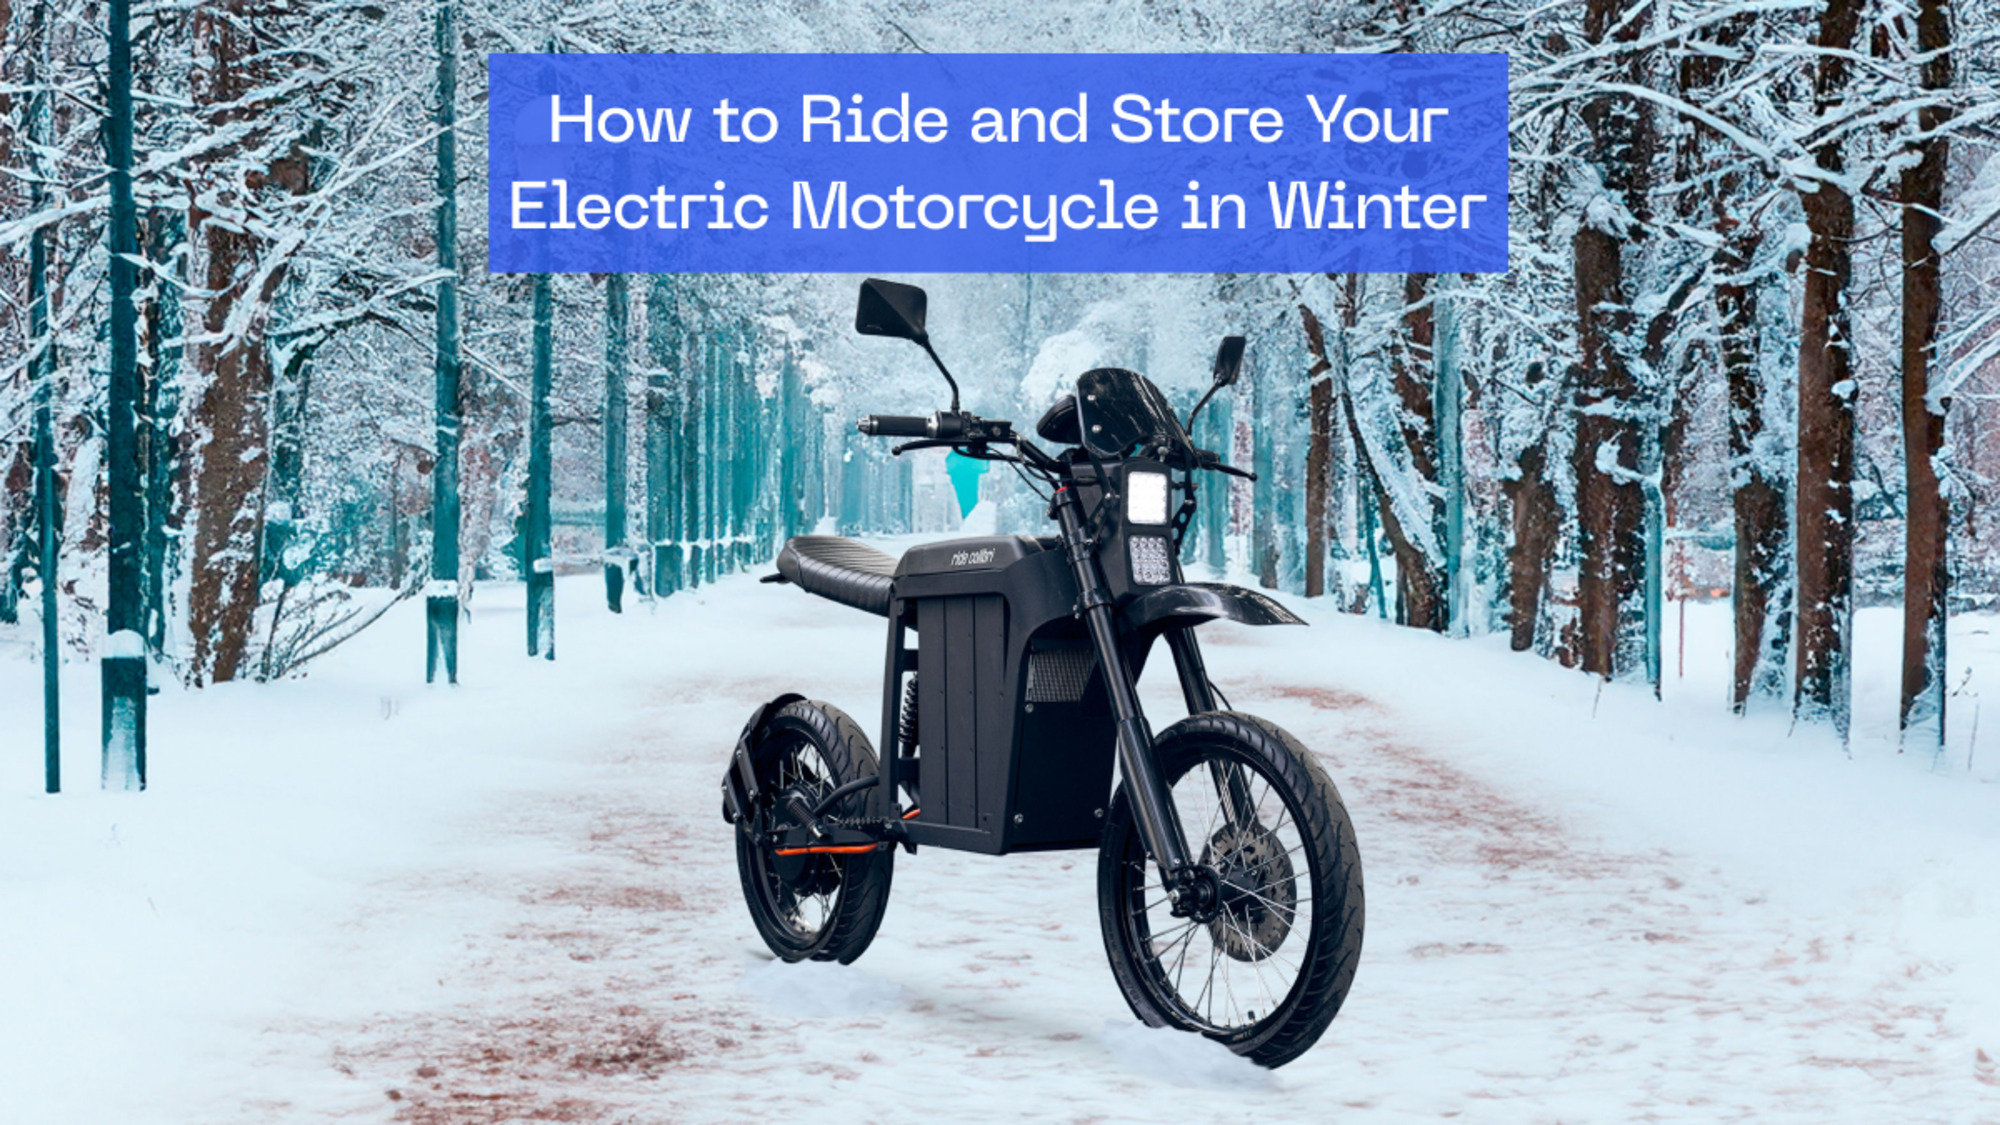 How to Ride and Store Your Electric Motorcycle in Winter